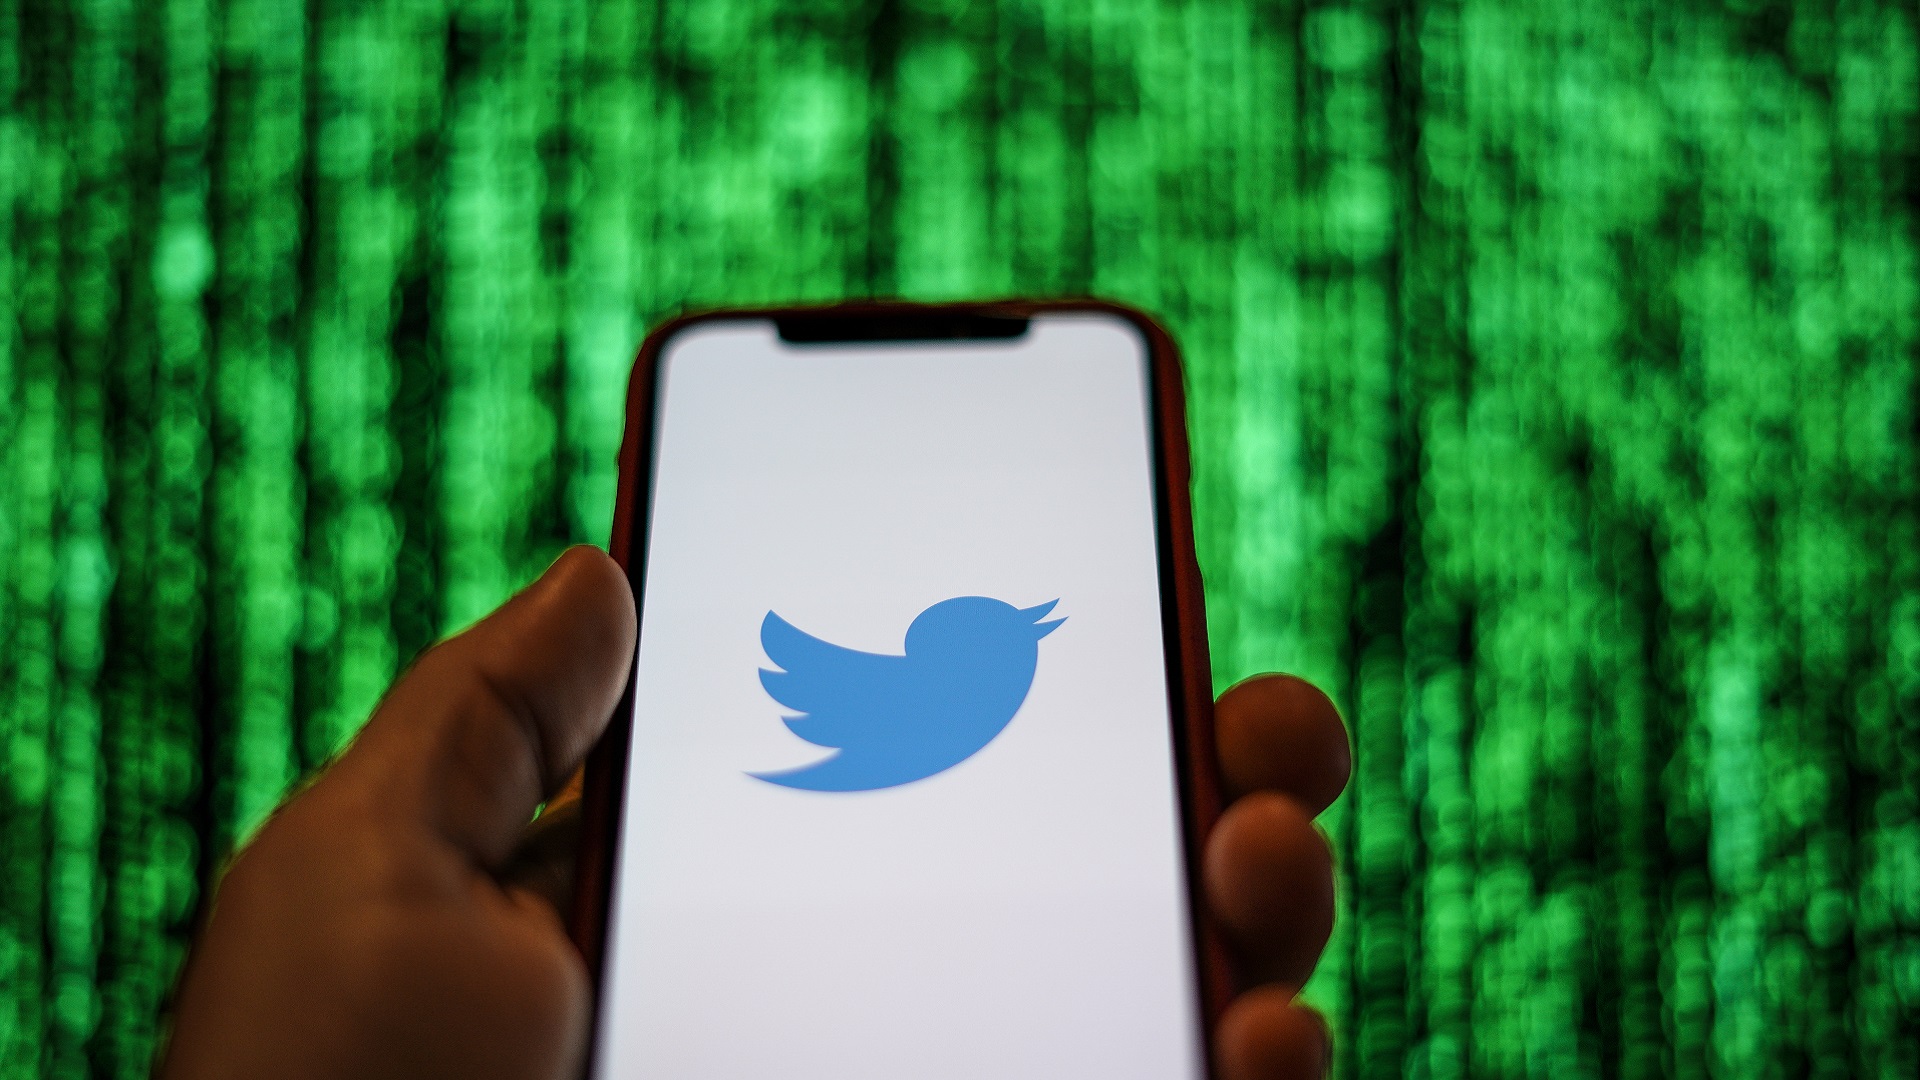 Twitter to 'protect users' after Saudi spy scandal